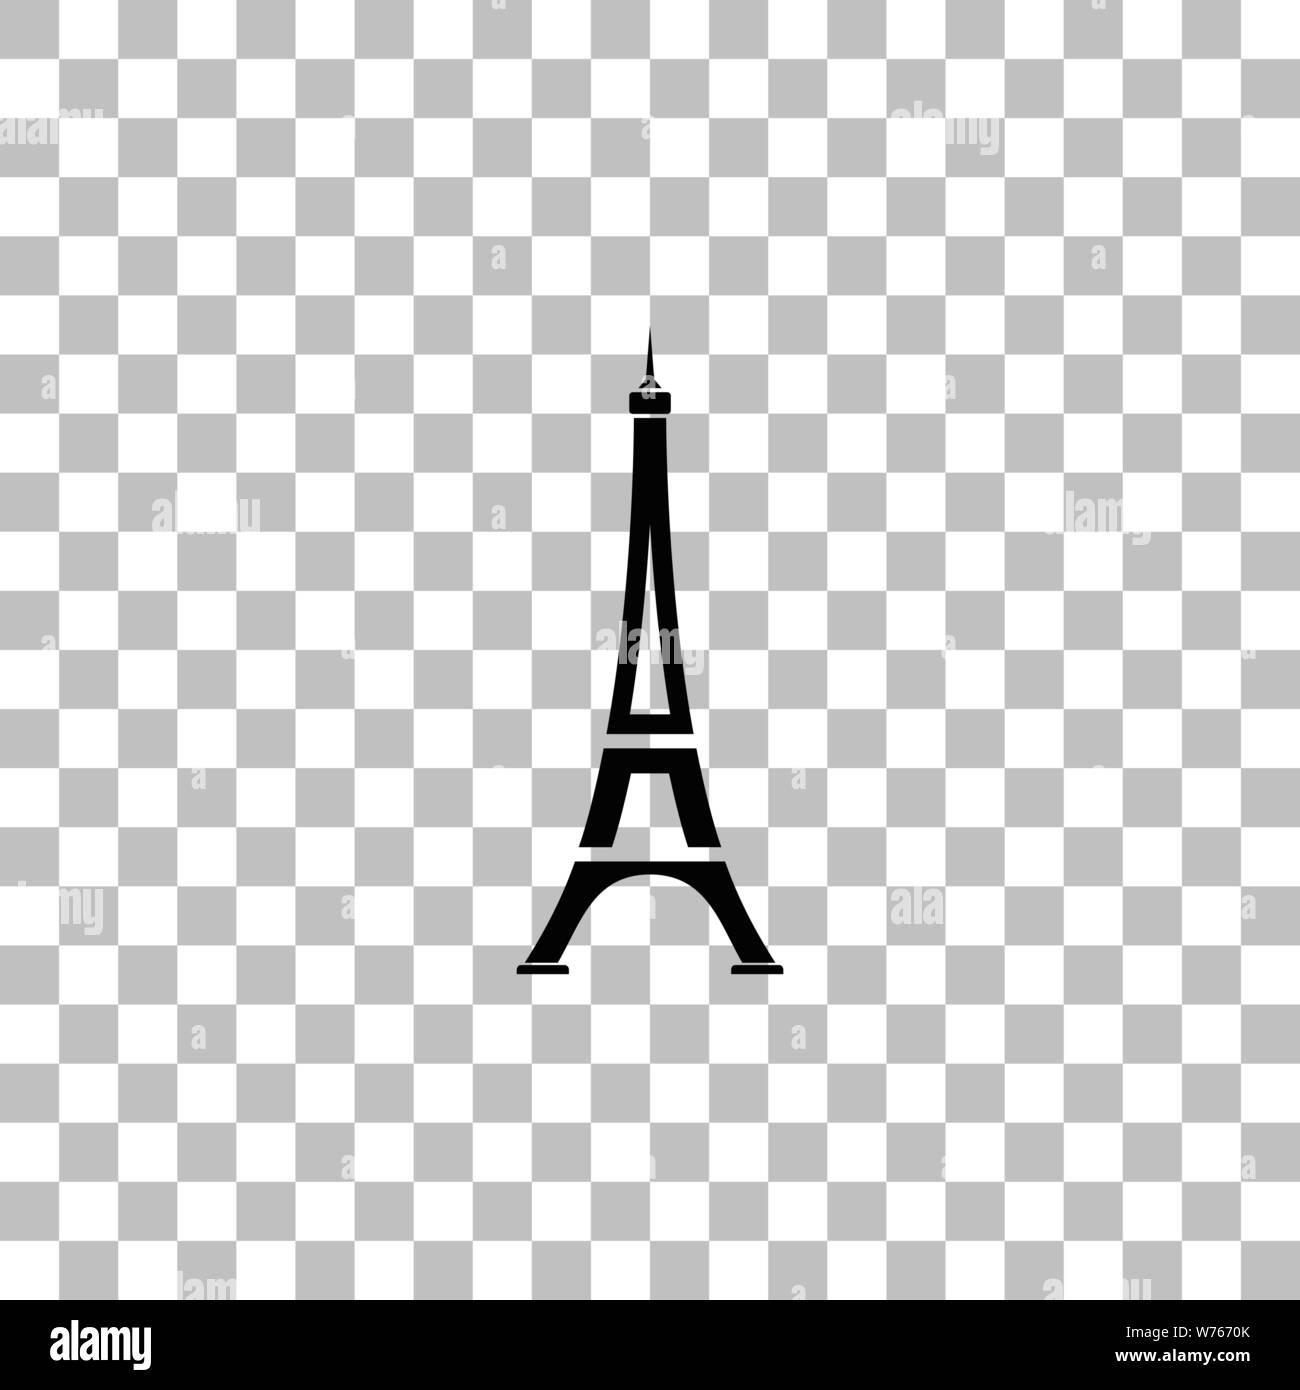 Eiffel tower. Black flat icon on a transparent background. Pictogram for your project Stock Vector